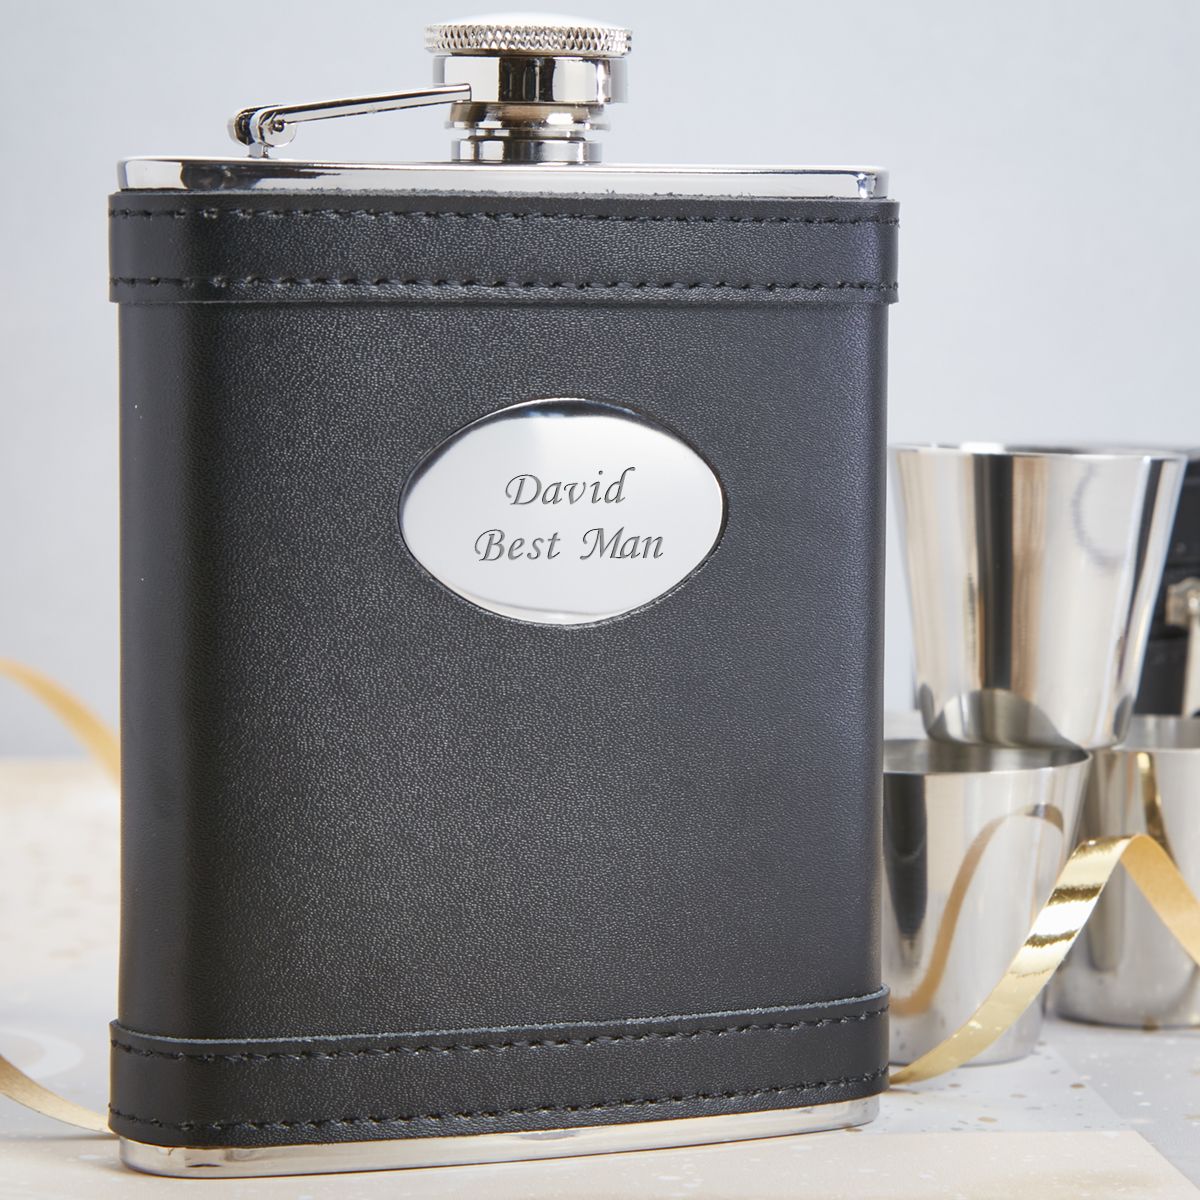 Groom Usher Groomsman Personalised Engraved Cigar Case Holder & Hip Flask Best Man Father's Day Wedding Gift Gift Father of Bride